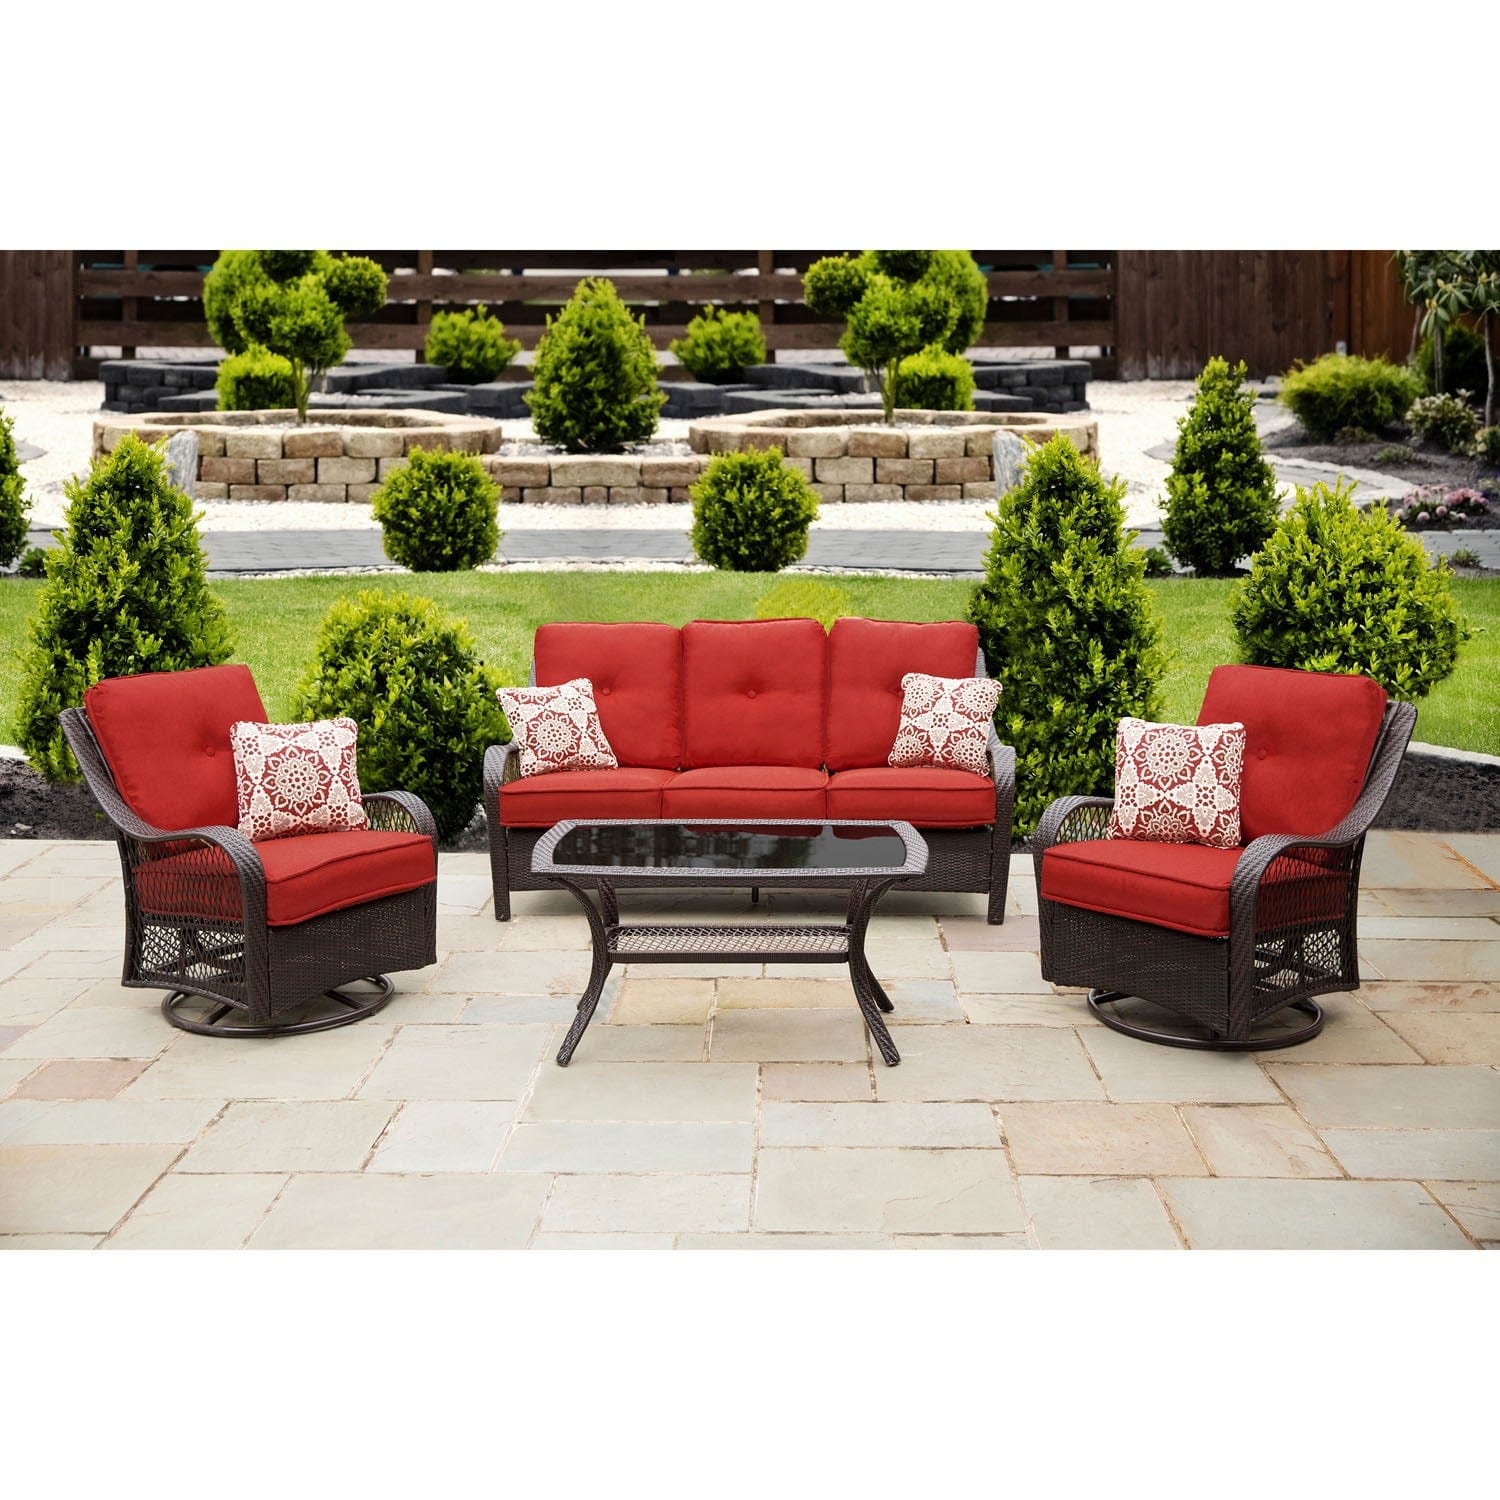 Hanover Conversation Set Hanover - Orleans 4-Piece All-Weather Patio Set in Autumn Berry | 2 Swivel Gliders, Sofa, Coffee Table | ORLEANS4PCSW-B-BRY